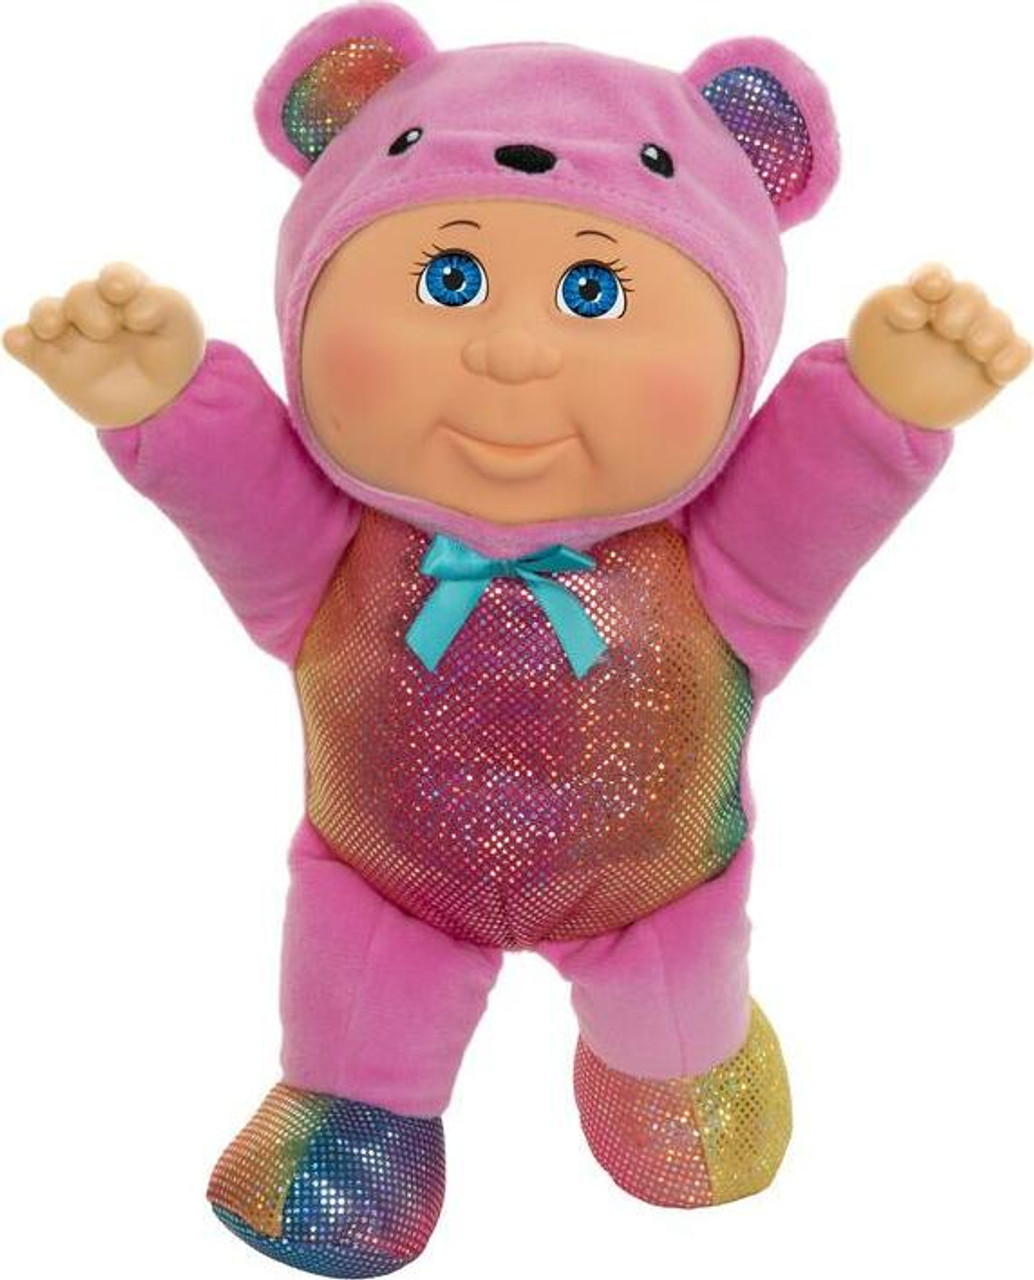 Cabbage Patch Kids® 9 Inch Cuties Dolls 4